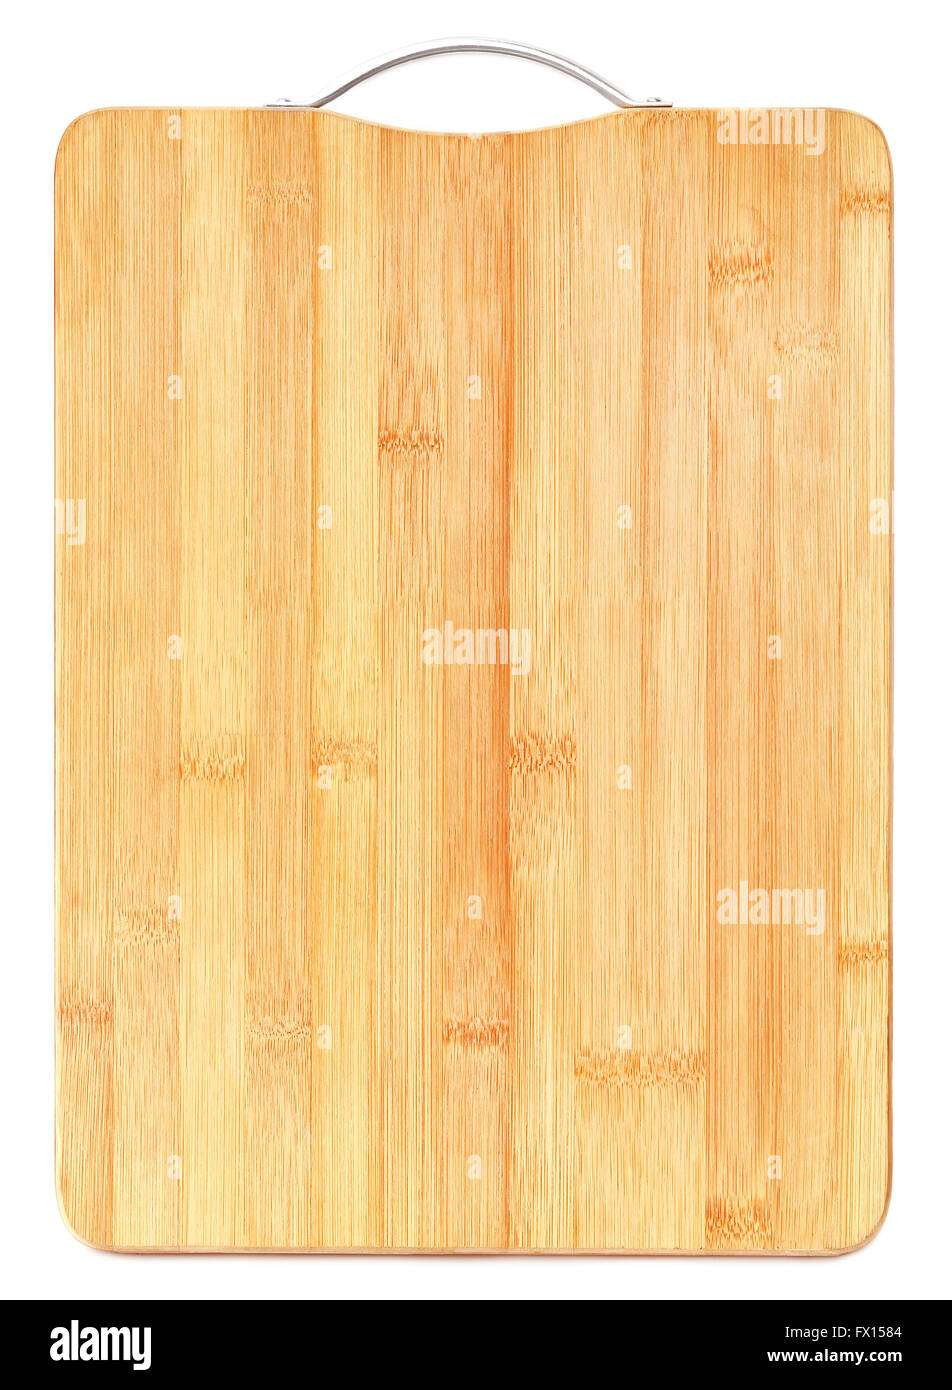 Chopping board over white background Stock Photo